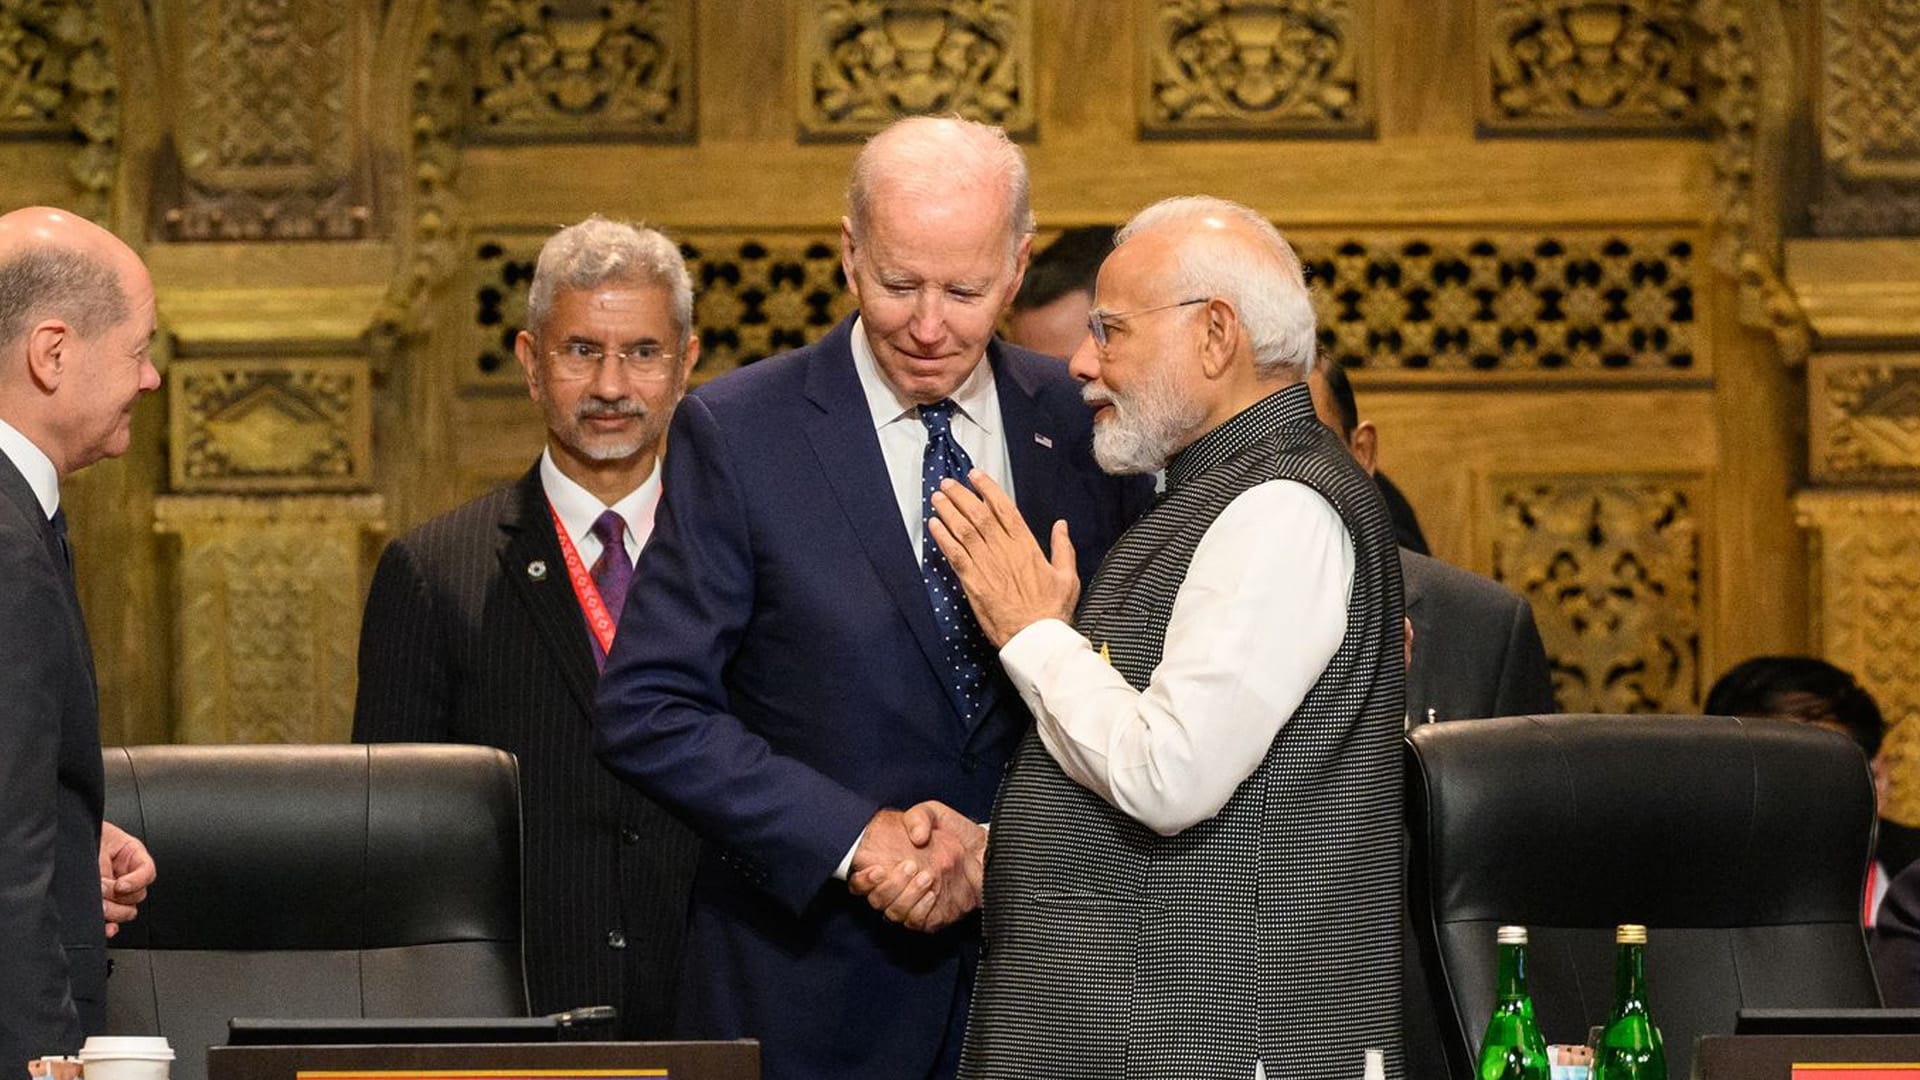 President Biden to visit India from Sept 7-10 to attend G-20 Summit